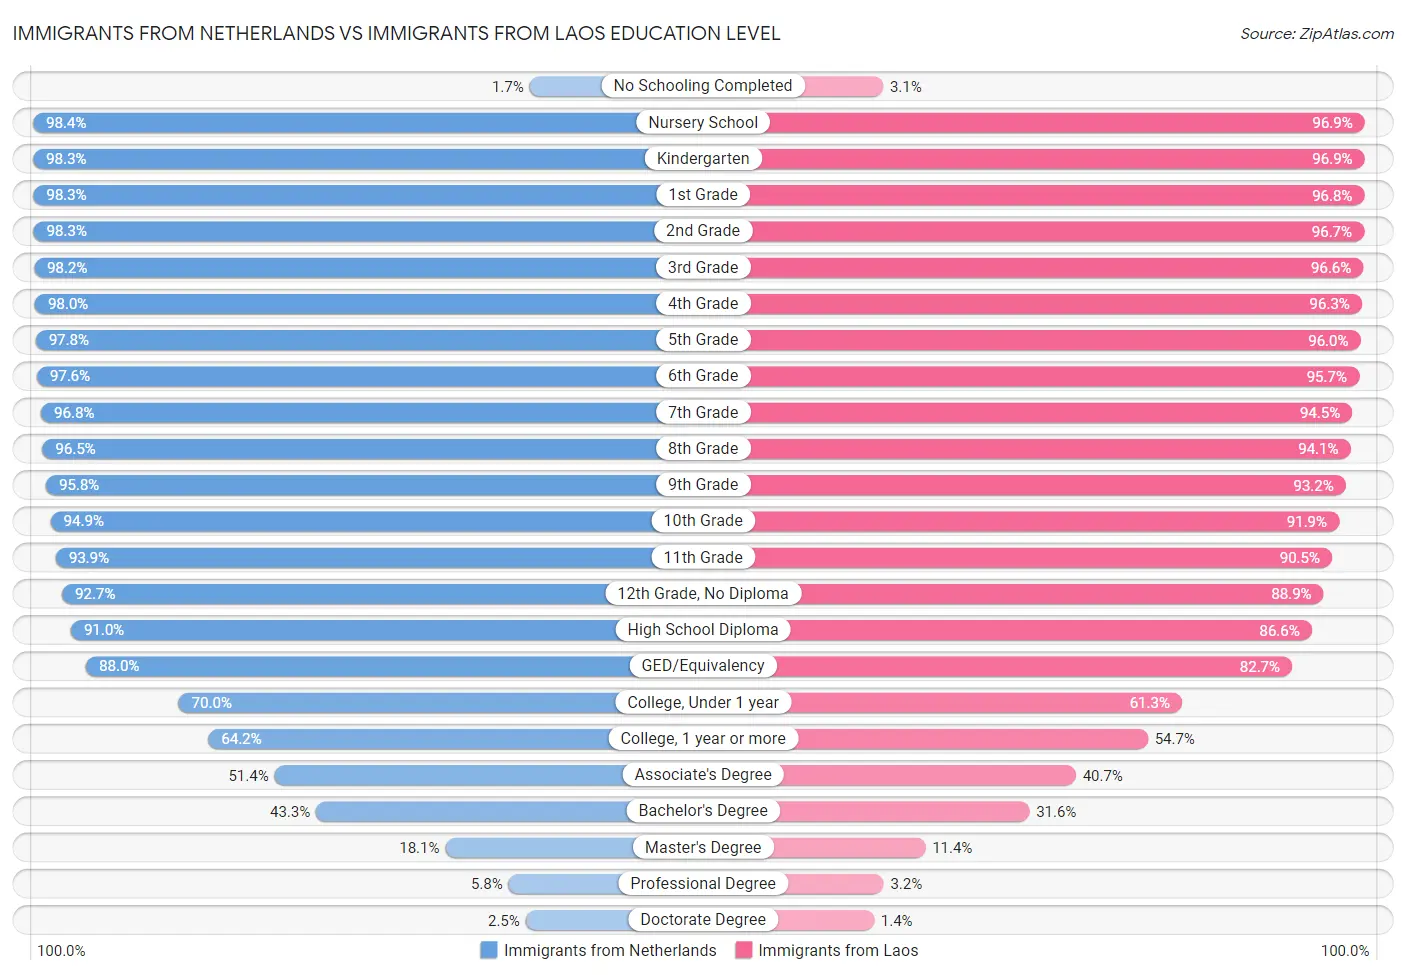 Immigrants from Netherlands vs Immigrants from Laos Education Level